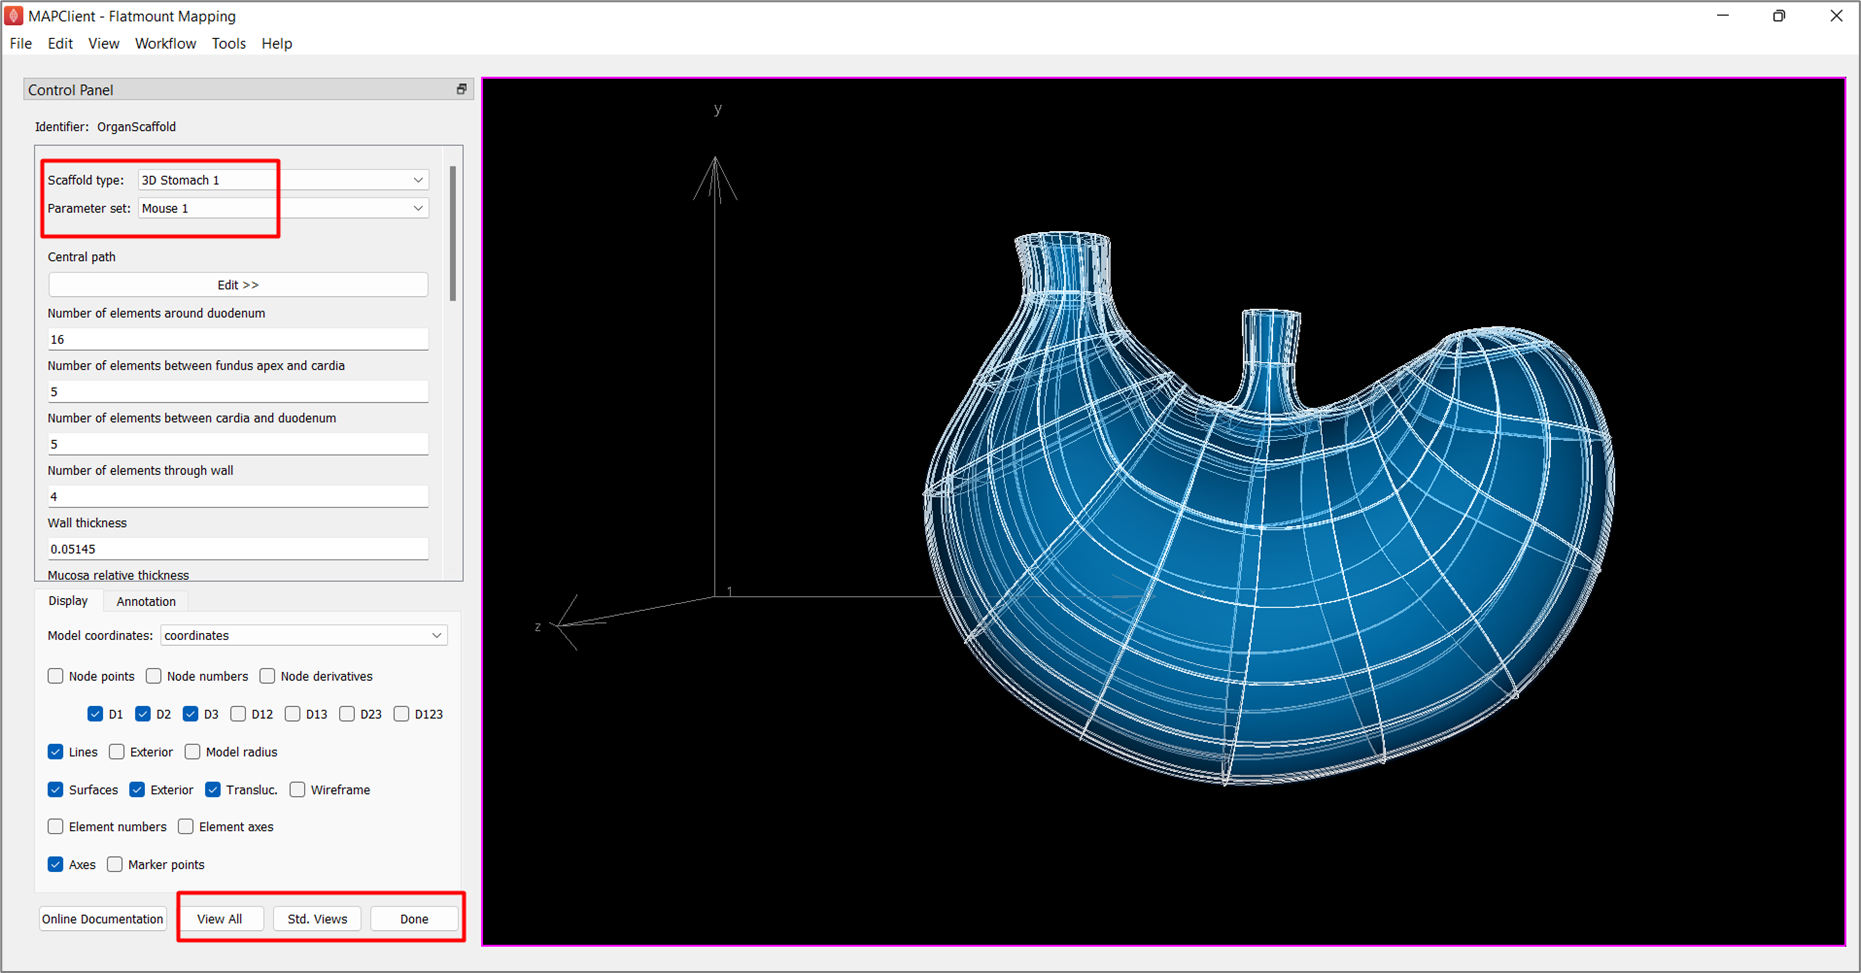 Figure 3. Scaffold Creator configured for a mouse 3D stomach scaffold, the view has been manipulated to show a non-default view.